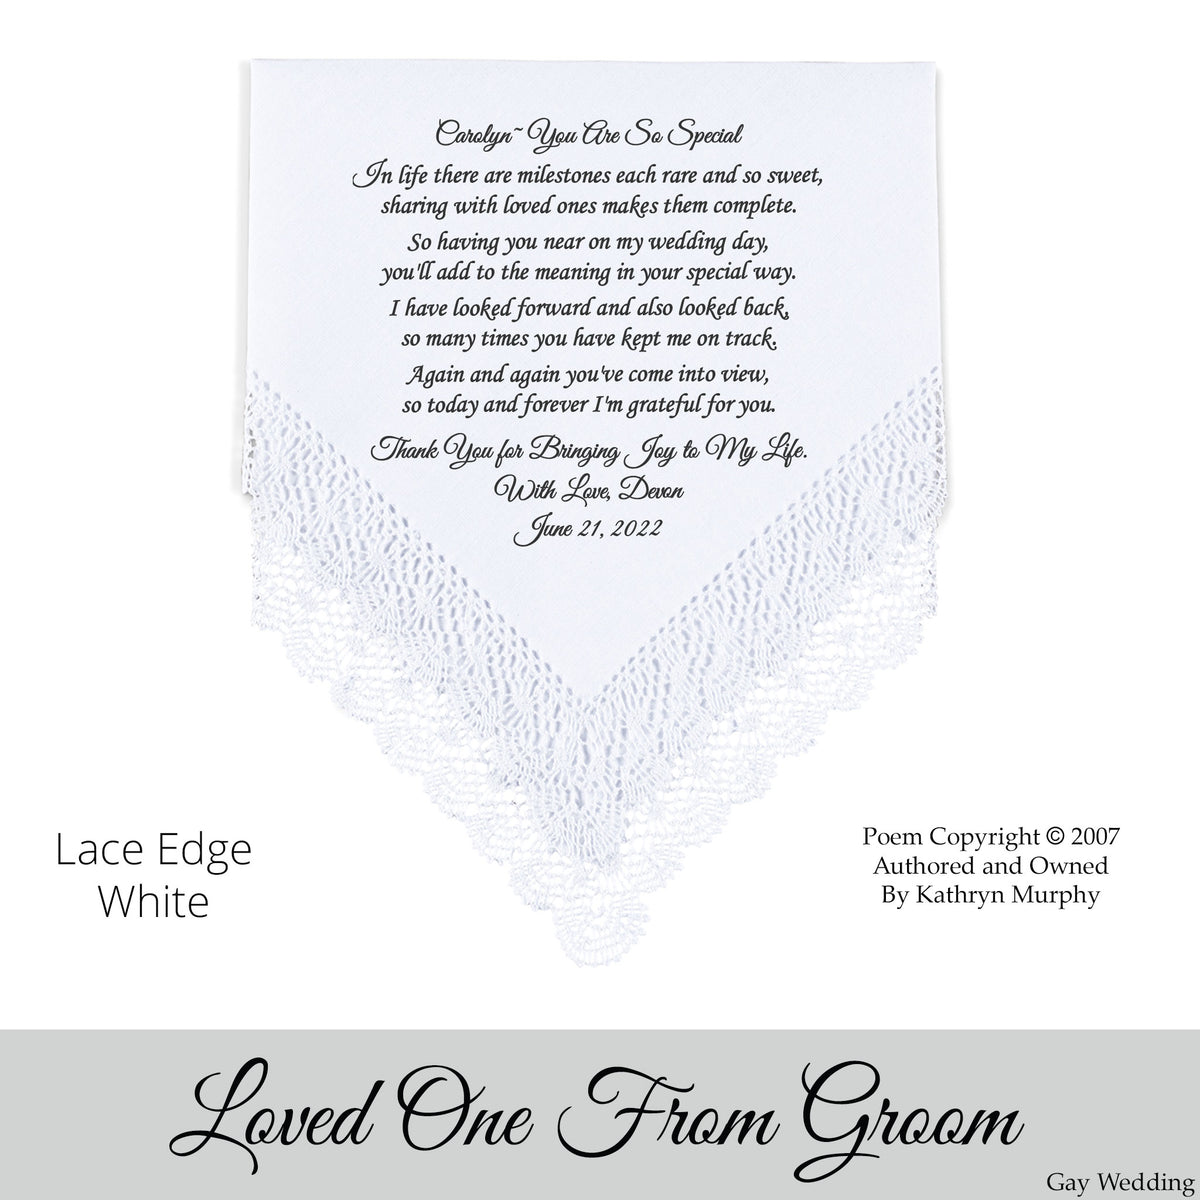 Poem Printed Gay Wedding Hankie from the Groom to Loved One or Friend &quot;You Are So Special&quot;